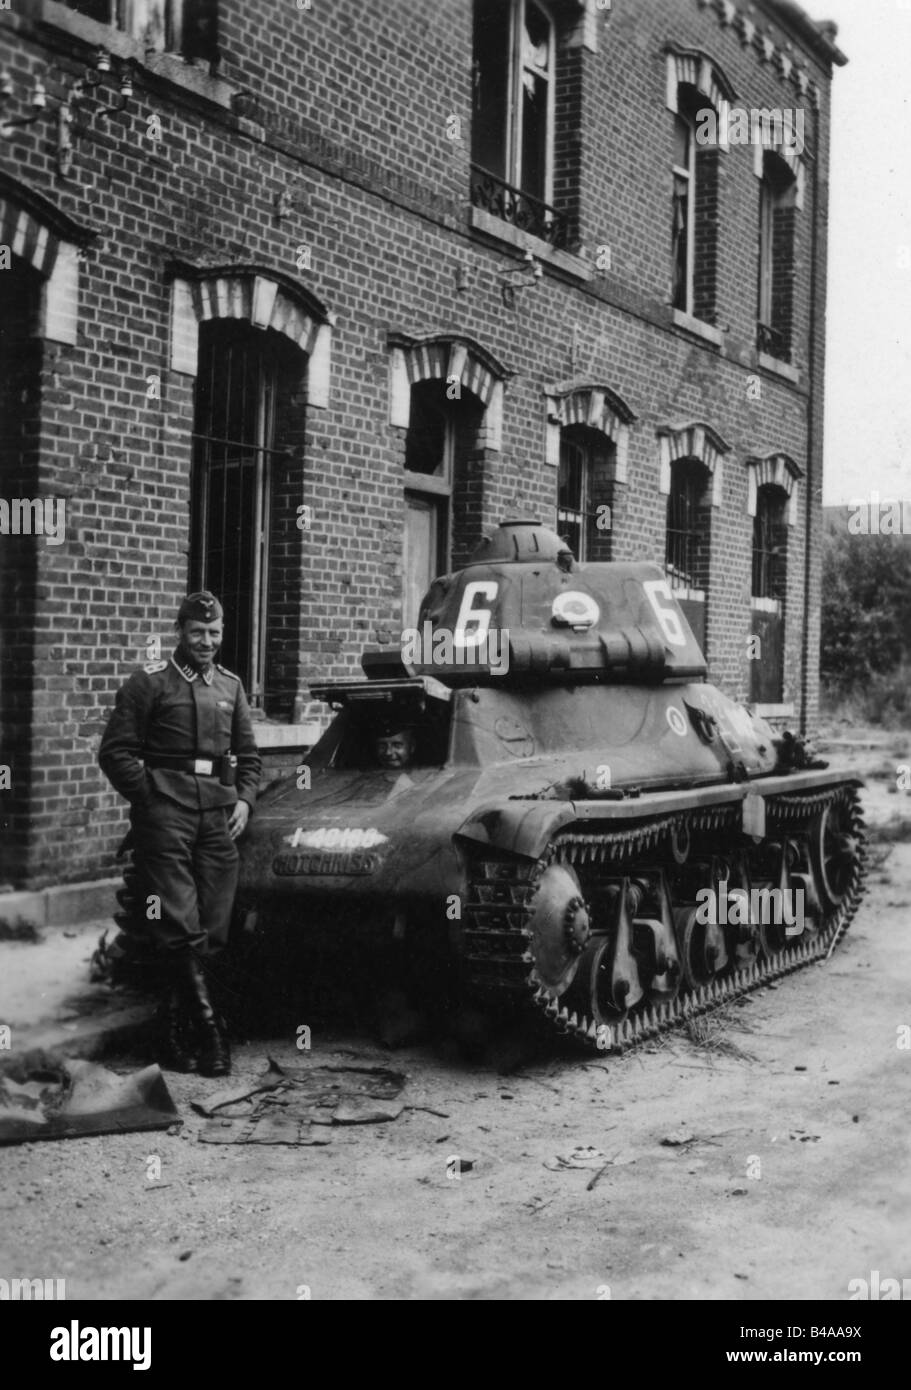 events, Second World War / WWII, France, abandoned French tank Hotchkiss H 35, near Cambrai, Summer 1940, German soldier, occupation, 20th century, historic, historical, H35, H-35, H39, H 39, H-39, armoured fighting vehicle, vehicles, tanks, people, 1940s, Stock Photo